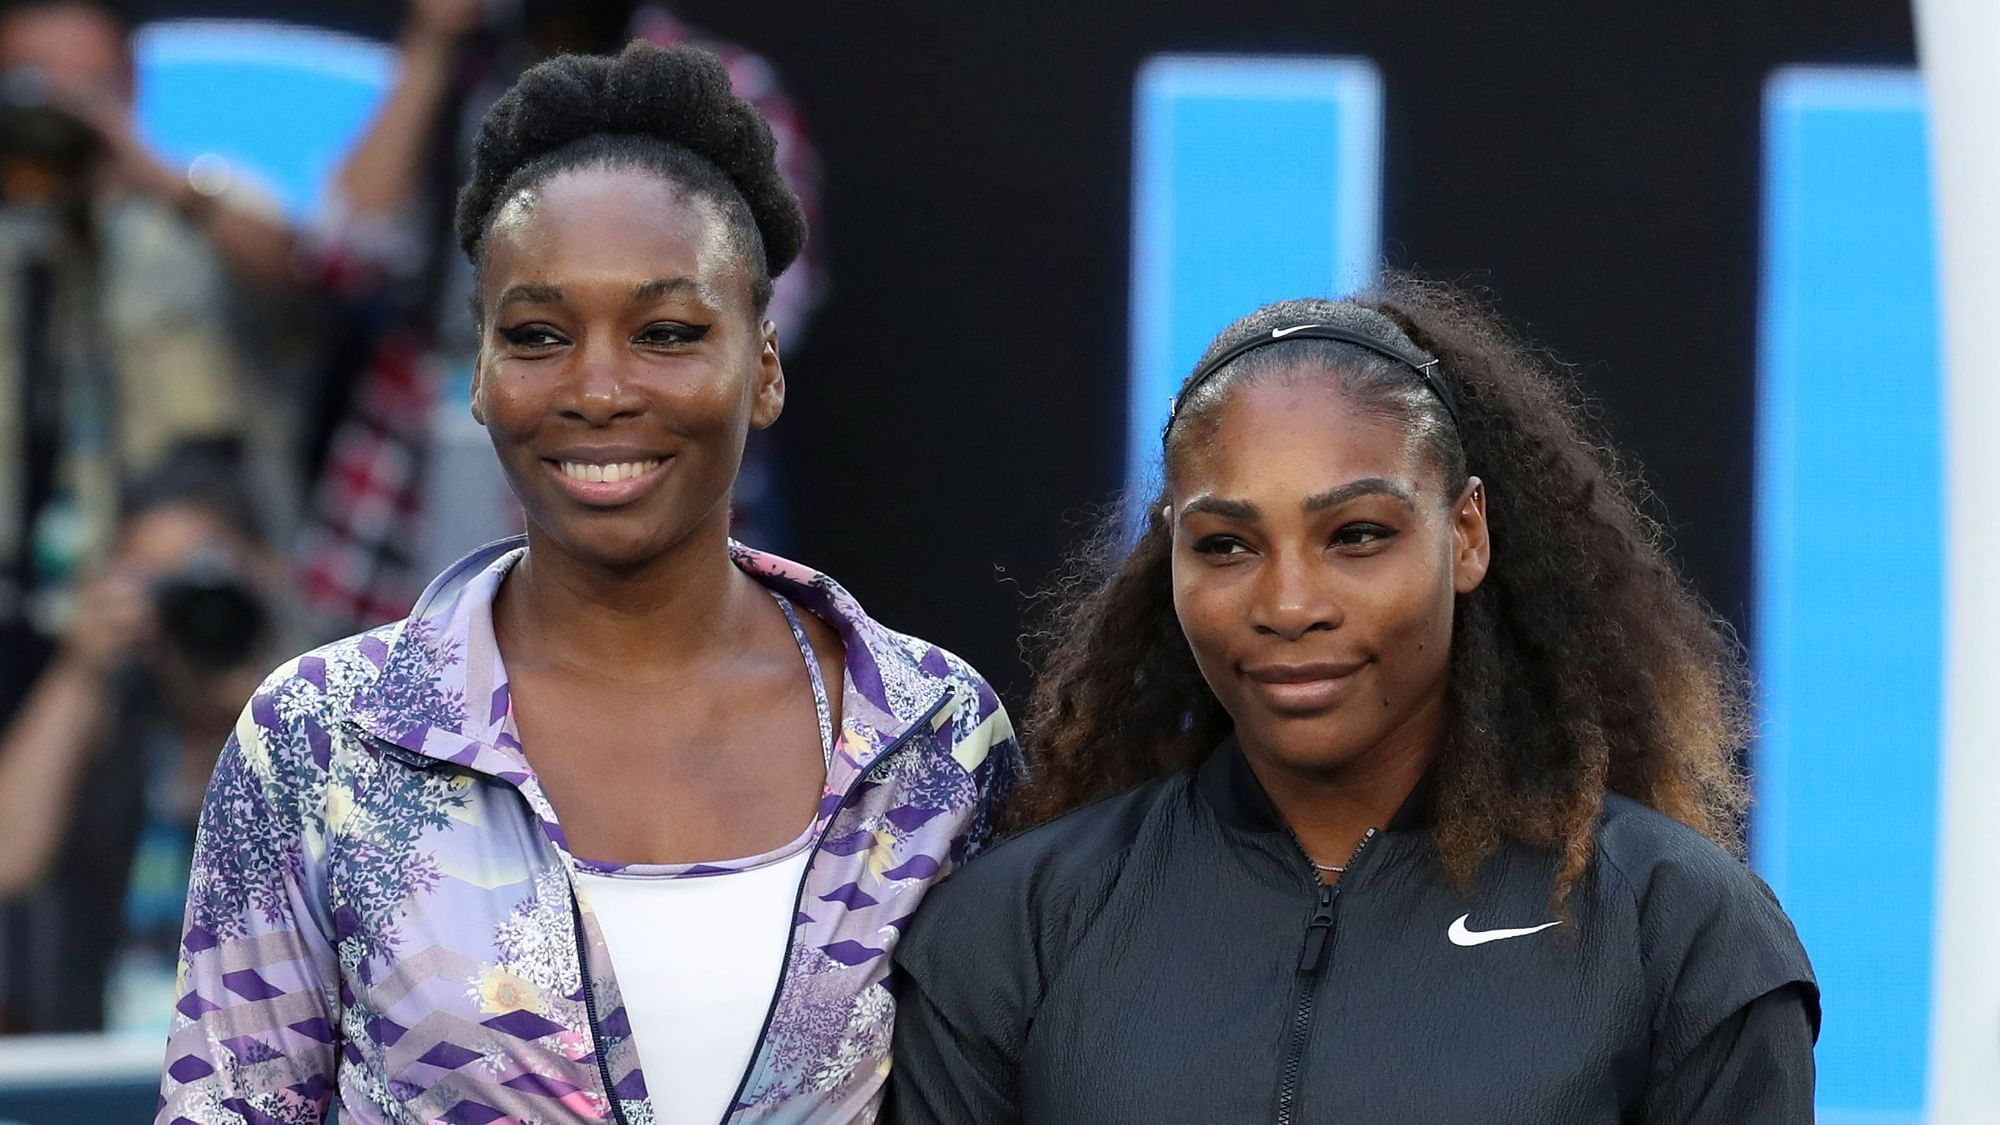 Serena Williams beat elder sister Venus to make it to the quarter-finals at the inaugural Top Seed Open.